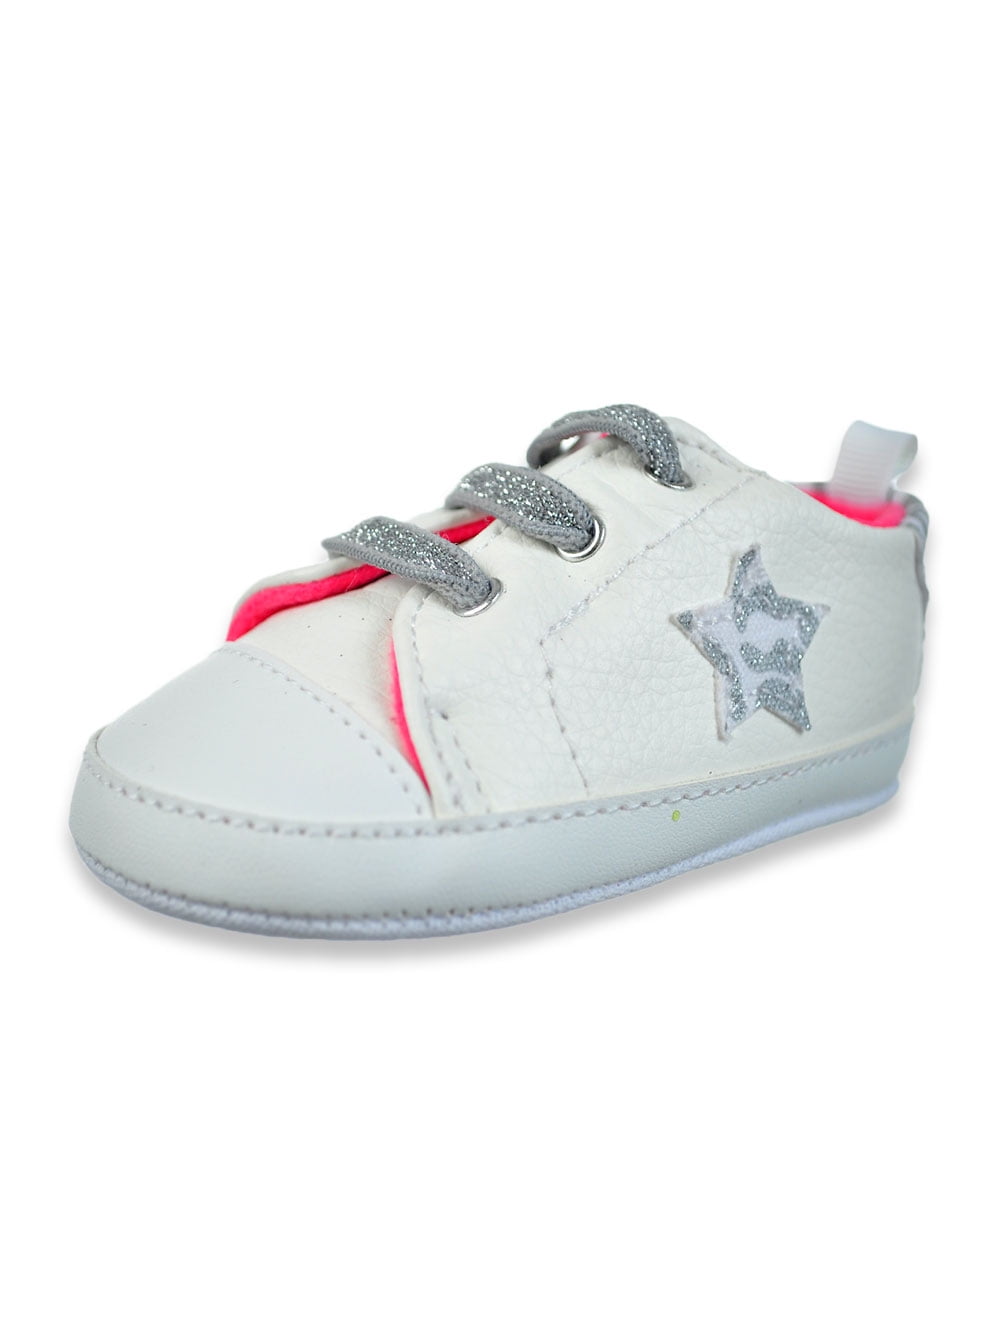 Baby Boy White Grey and Red Baseball Type Shoe size 0-3 months 